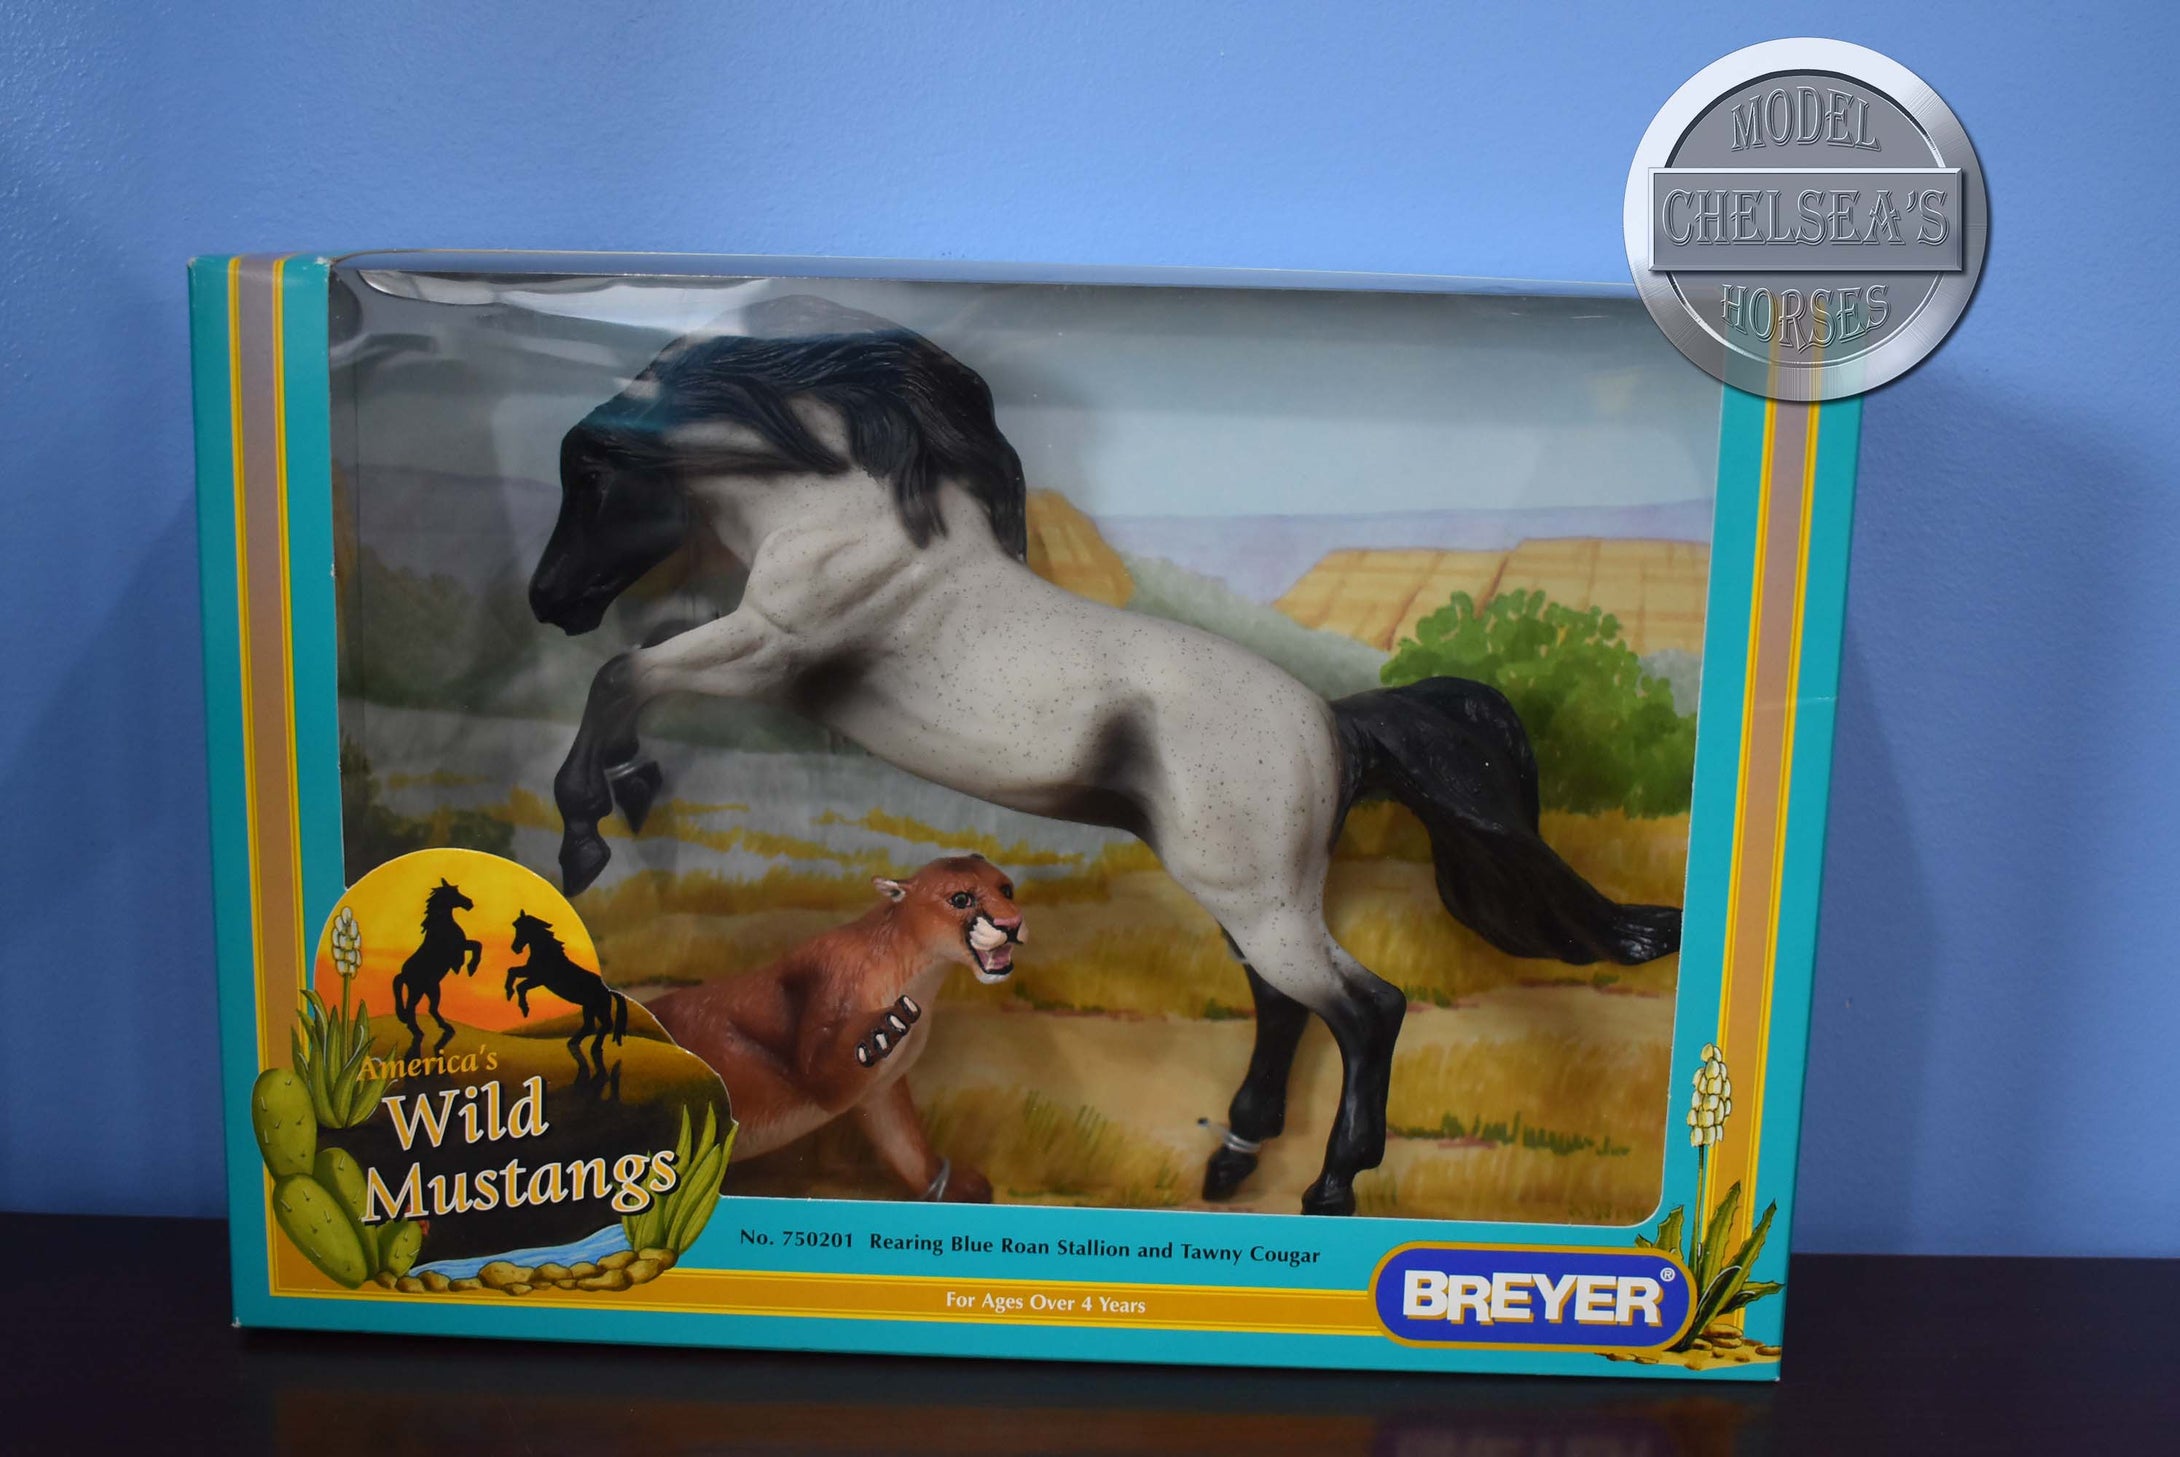 Rearing Blue Roan Stallion and Tawny Cougar-#750201-New in Box-Wild Mustangs-Breyer Classic